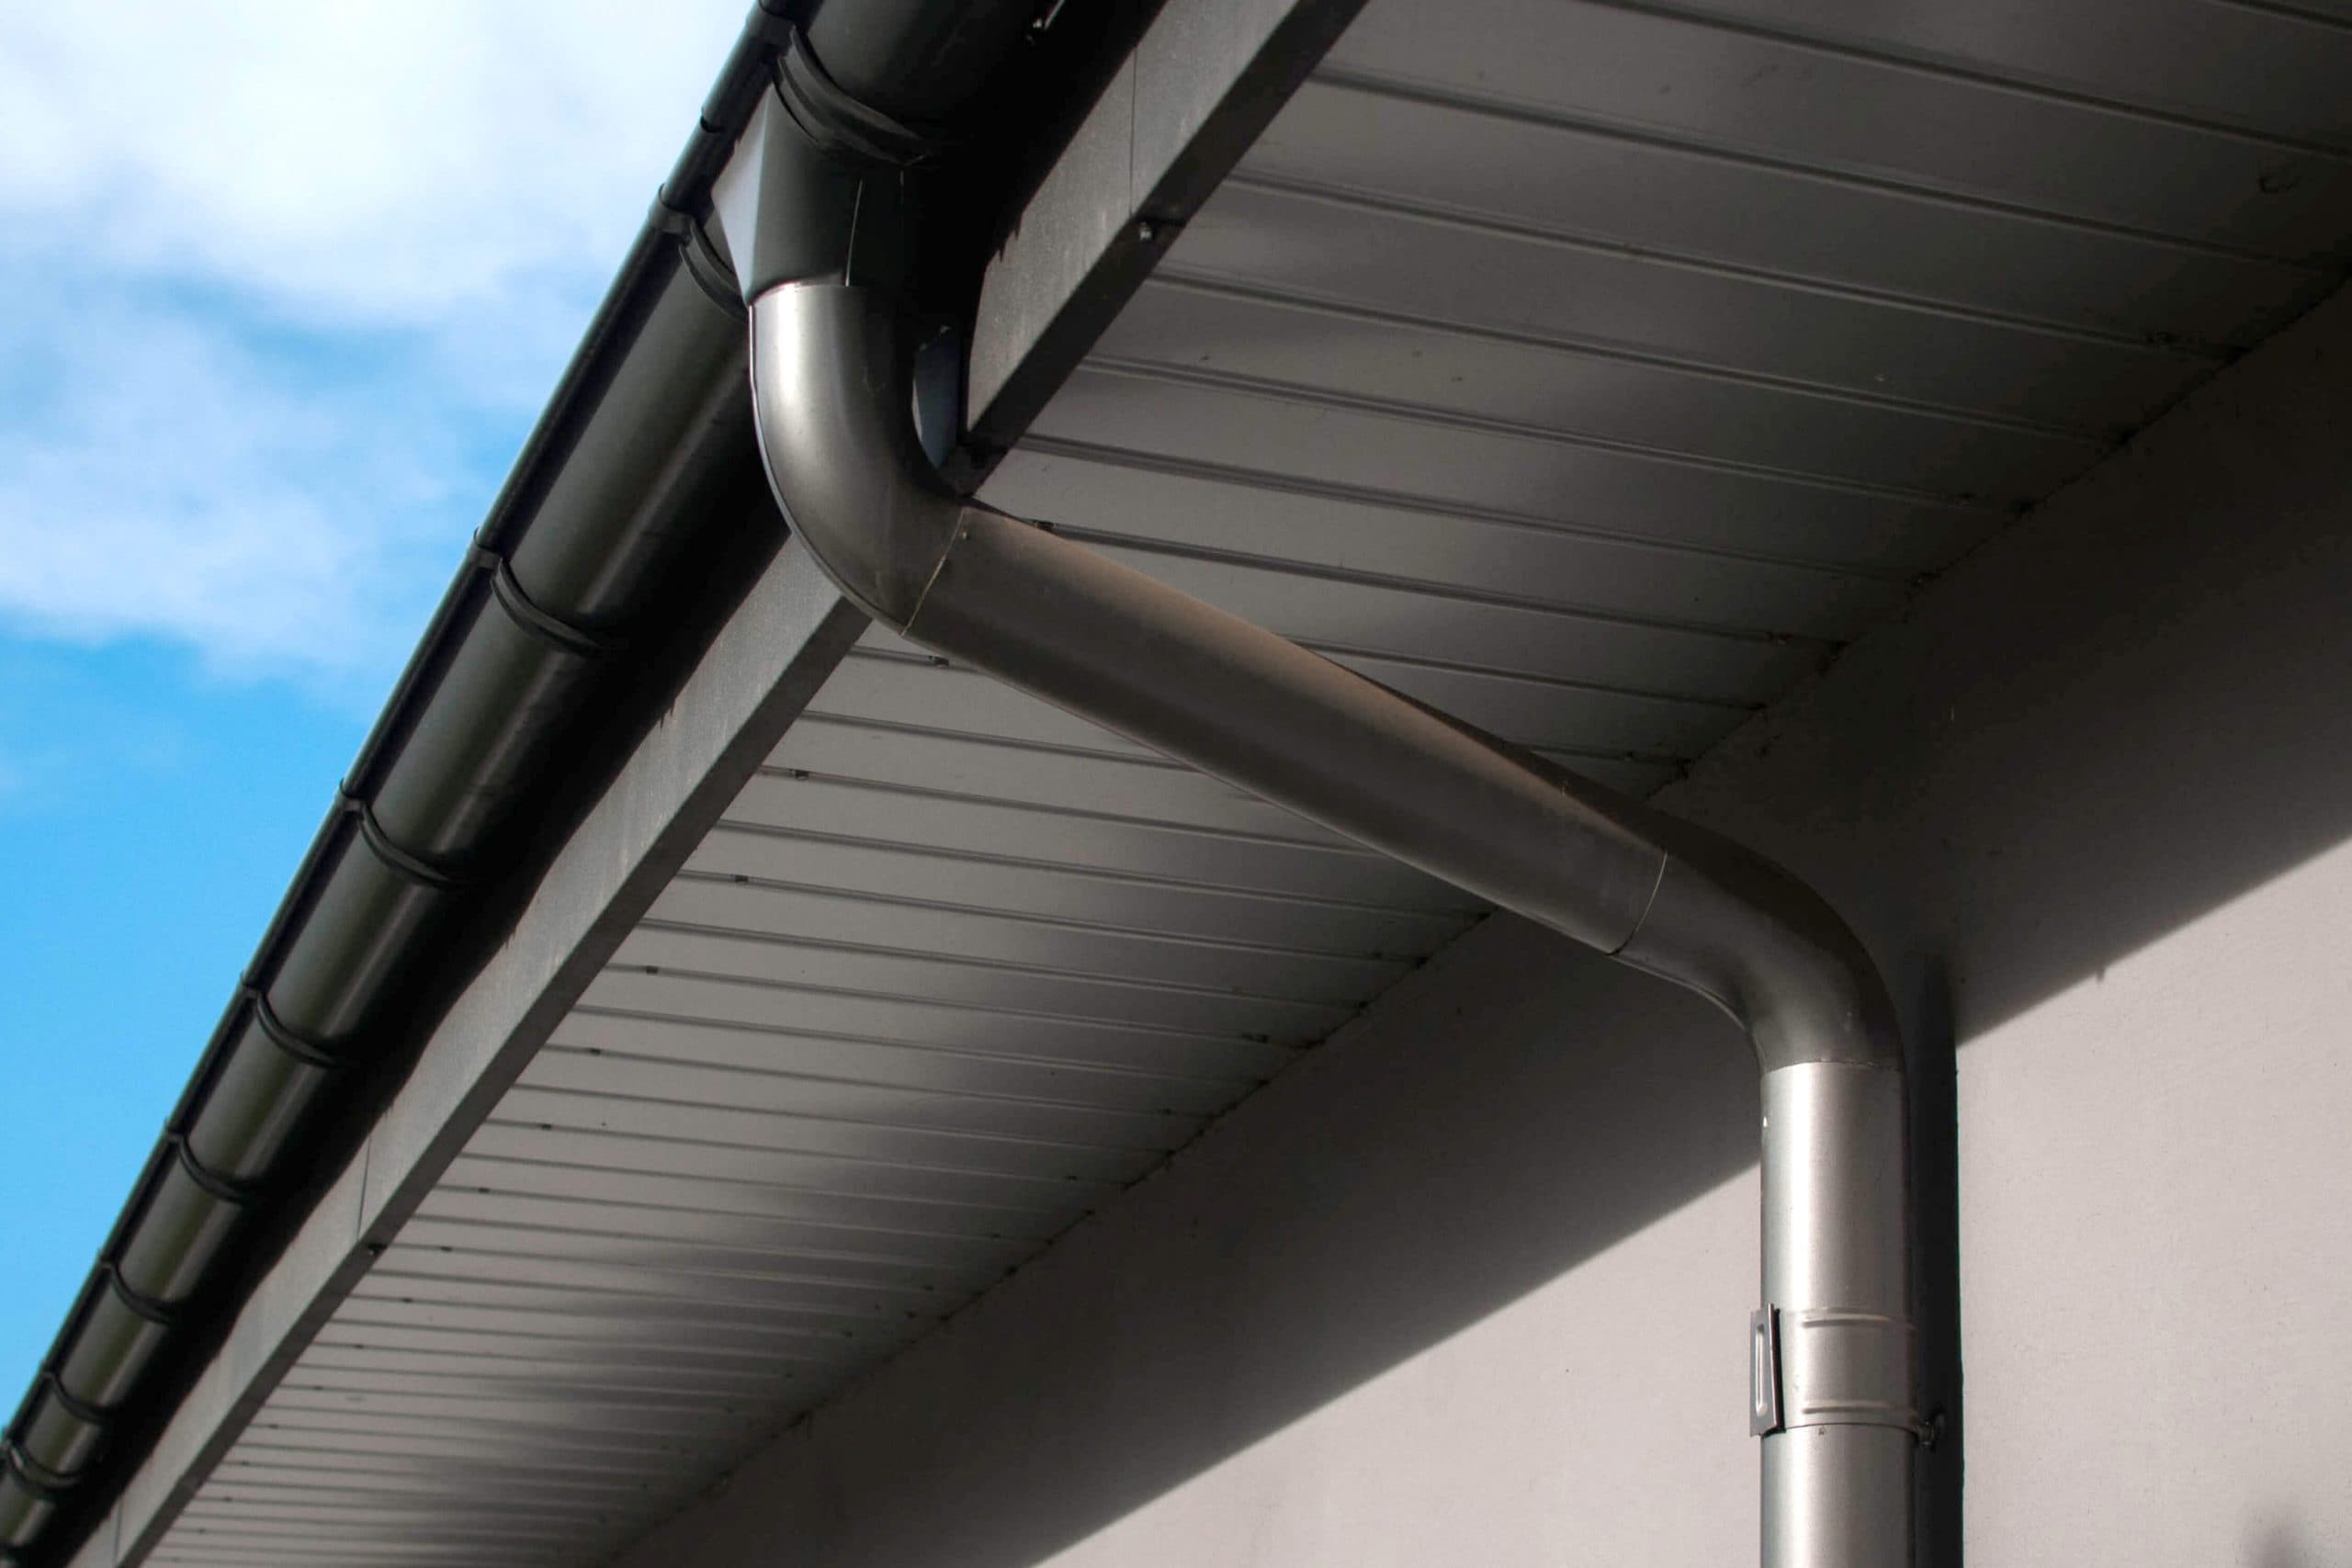 Corrosion-resistant galvanized gutters installed on a commercial building in St. Paul